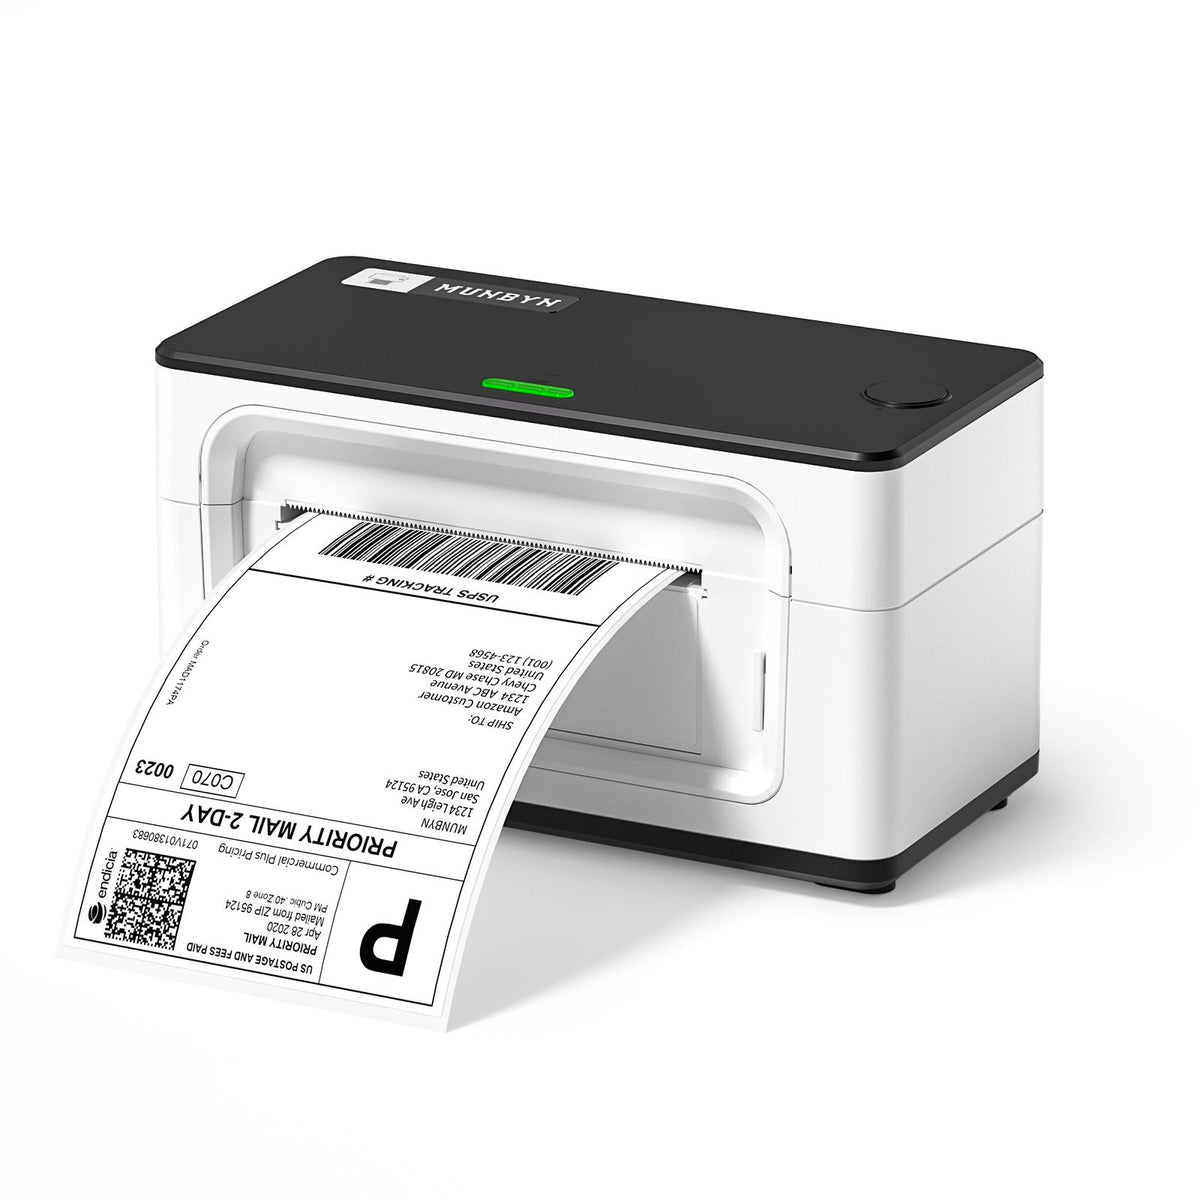 The MUNBYN USB thermal shipping label printer is a high-speed, reliable, and easy-to-use printer that is perfect for printing shipping labels, address labels, and other custom labels.